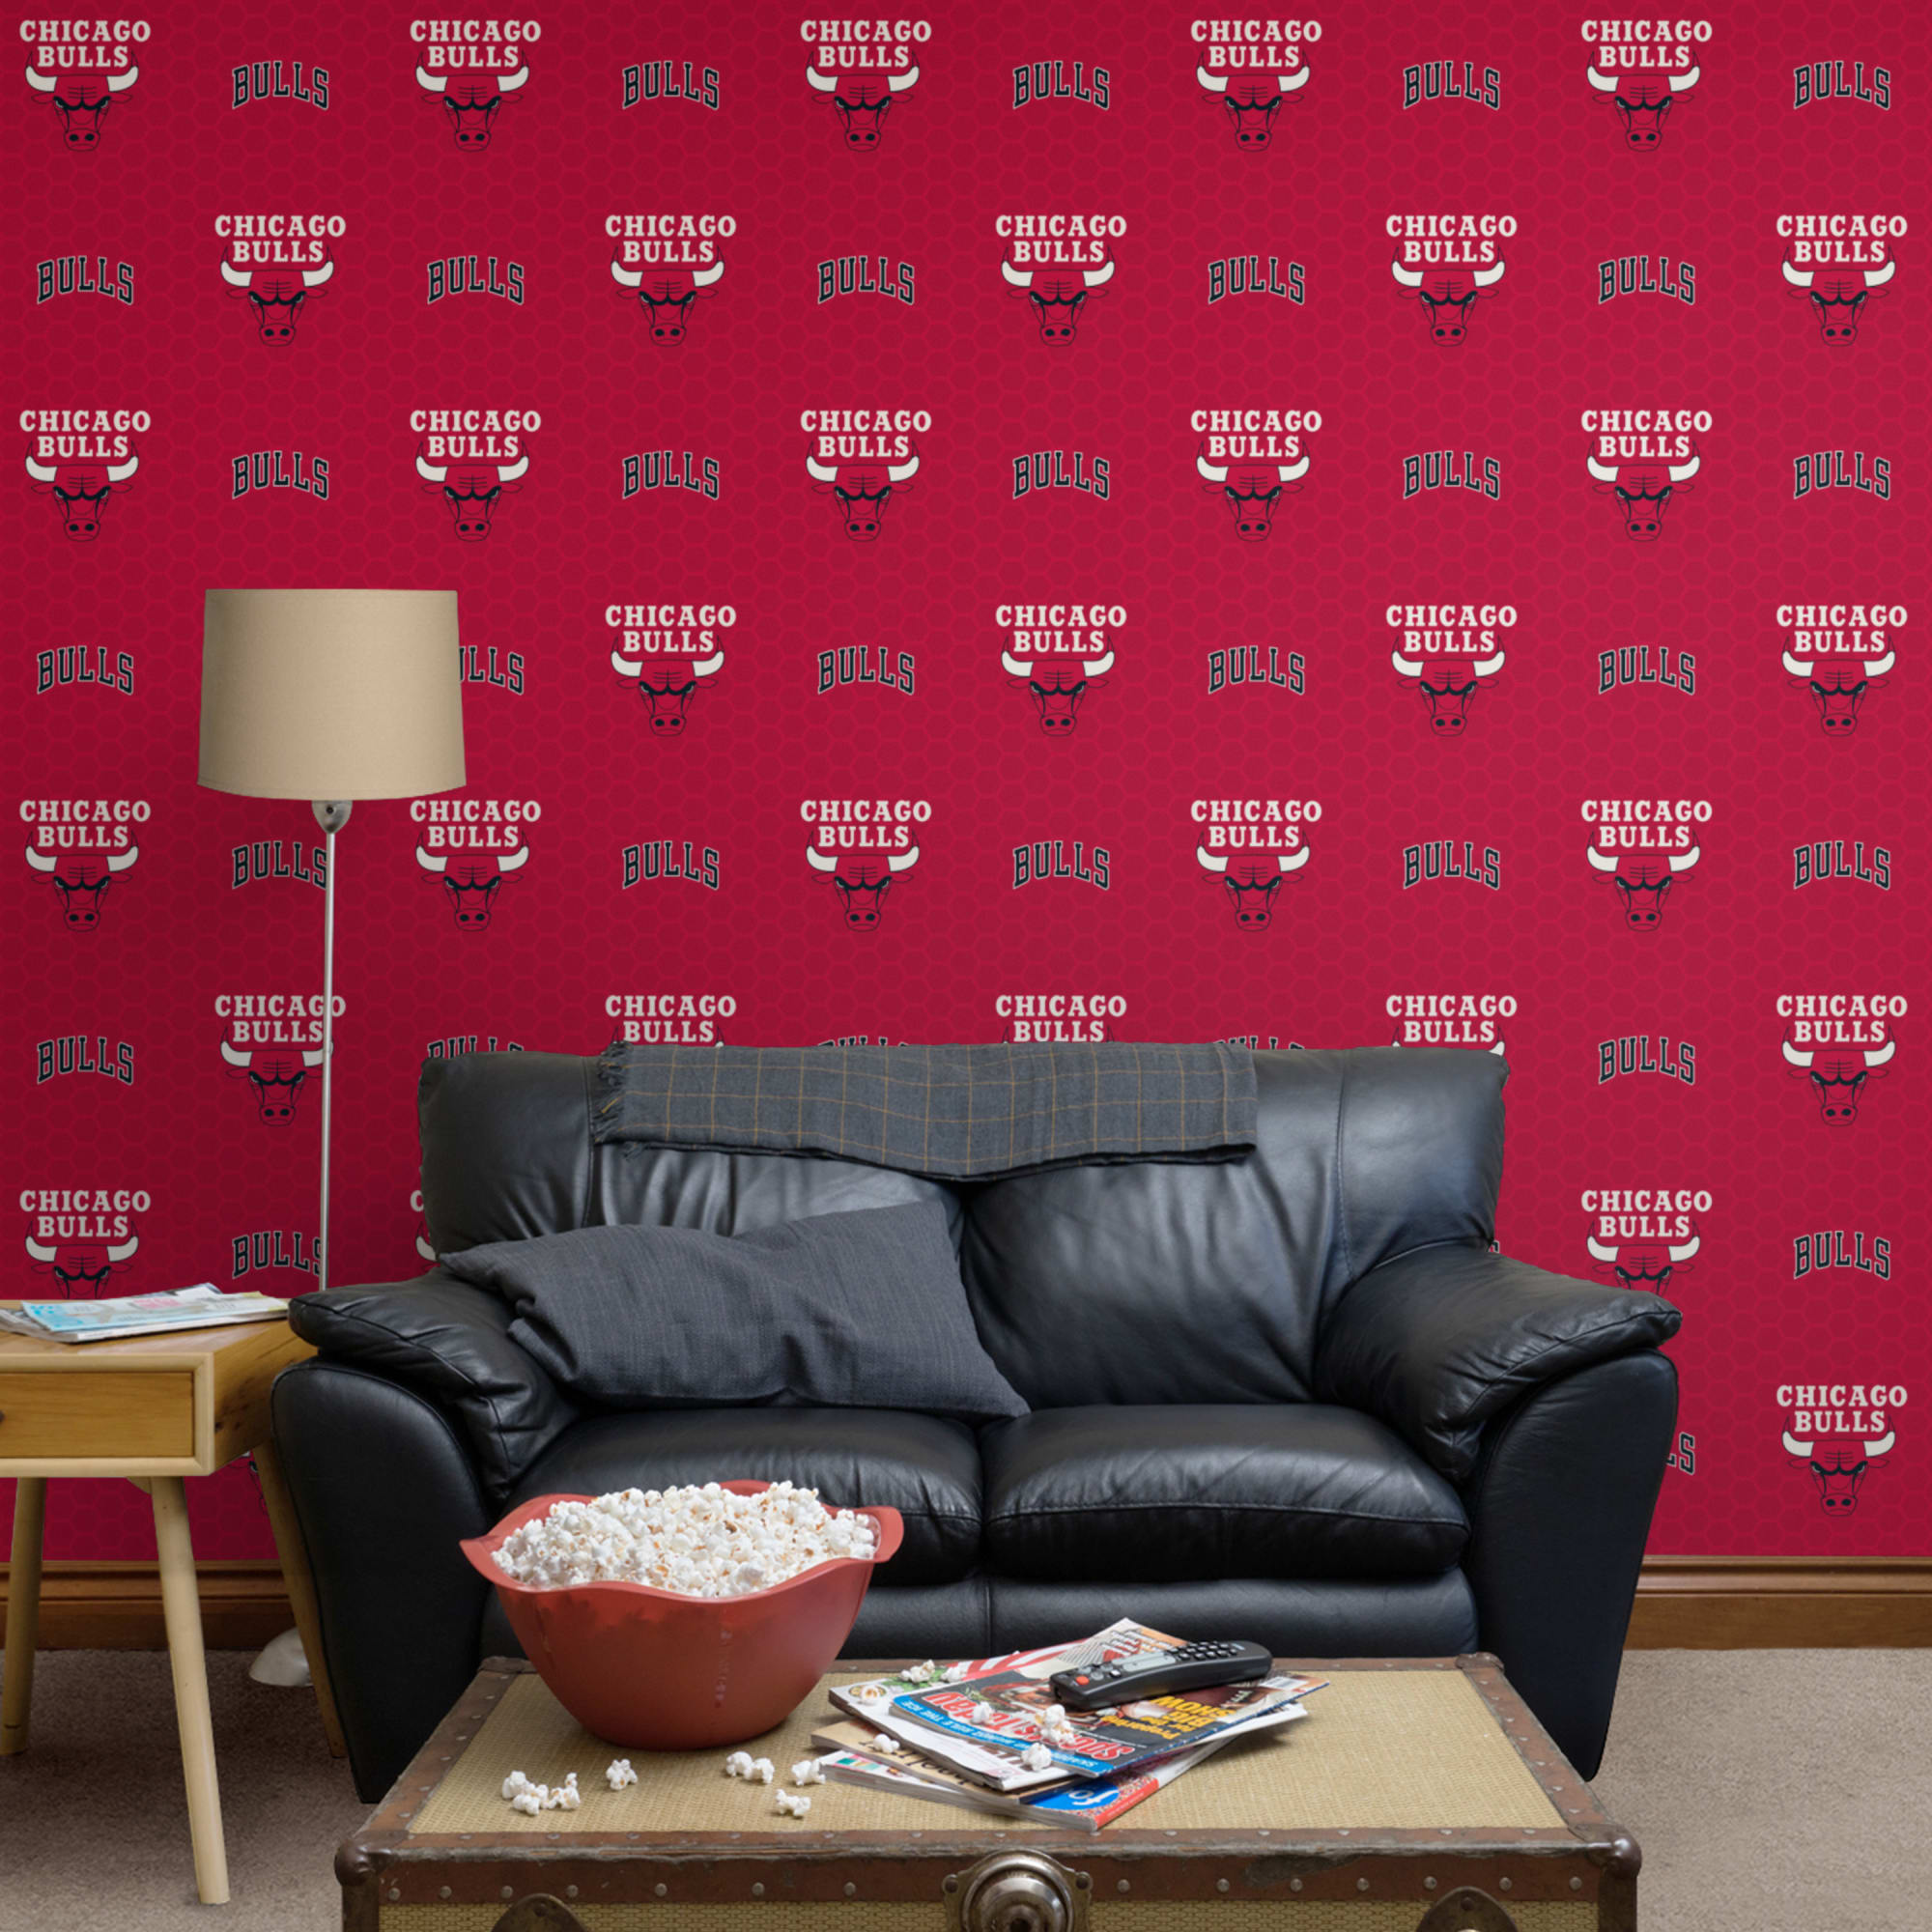 Chicago Bulls: Logo Pattern - Officially Licensed Removable Wallpaper 12" x 12" Sample by Fathead